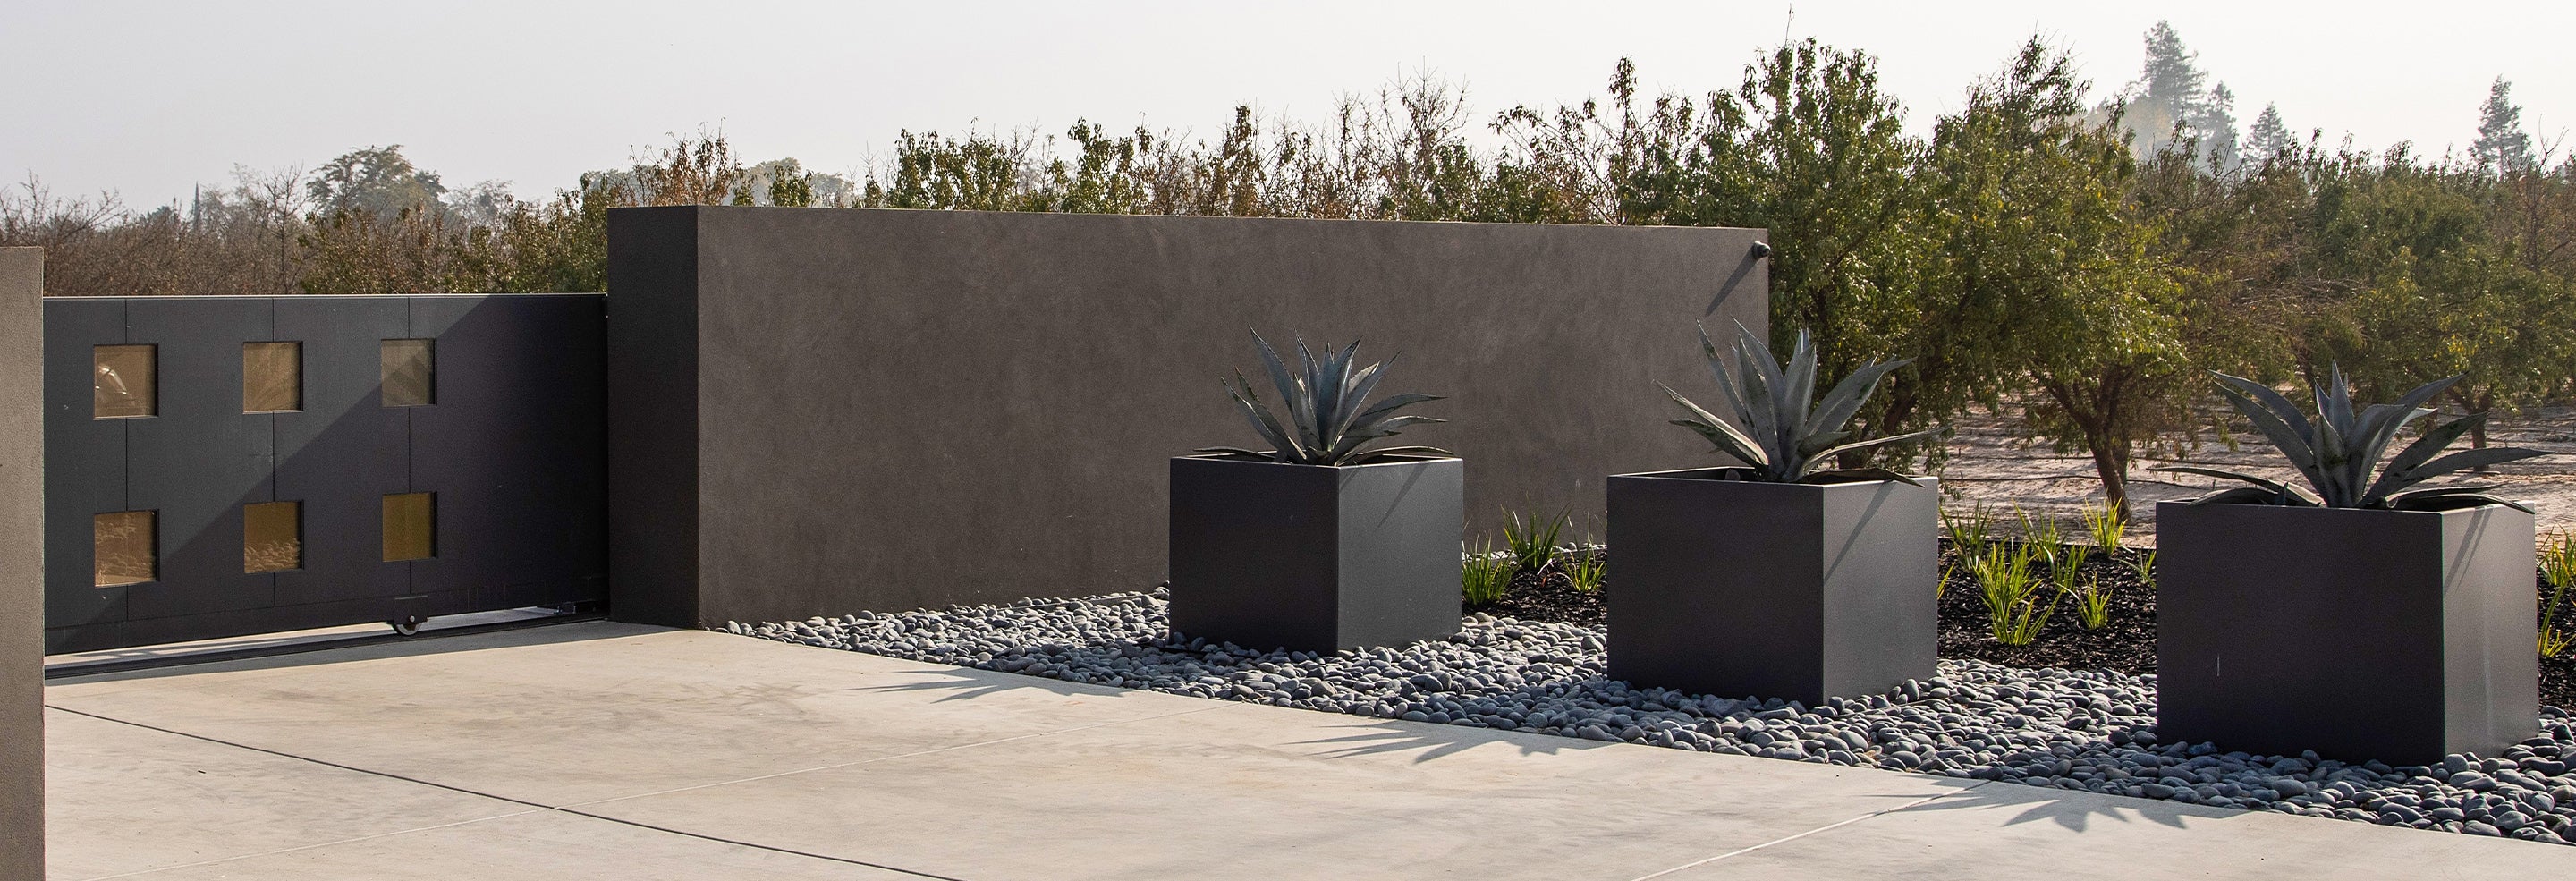 Large Square Planters at Private Residence in California